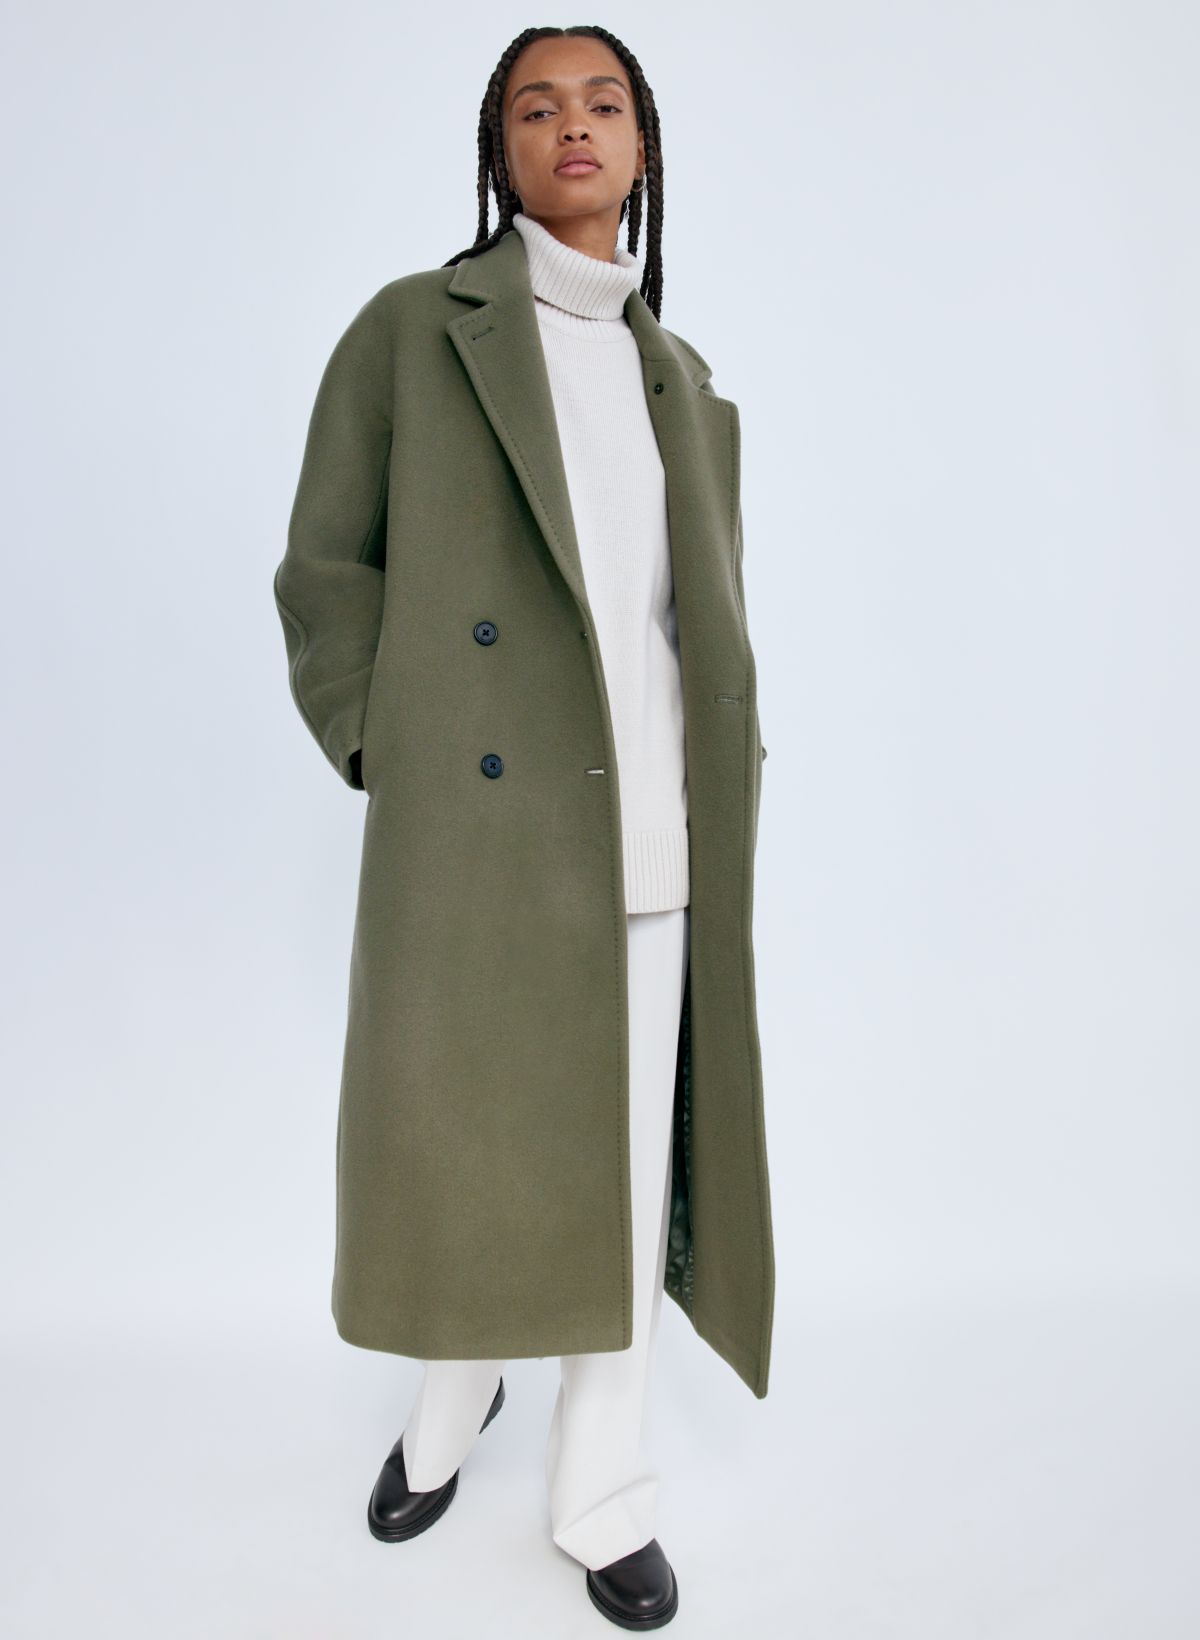 Italian Wool Cashmere Double Breasted Tailored Coat, 50% OFF